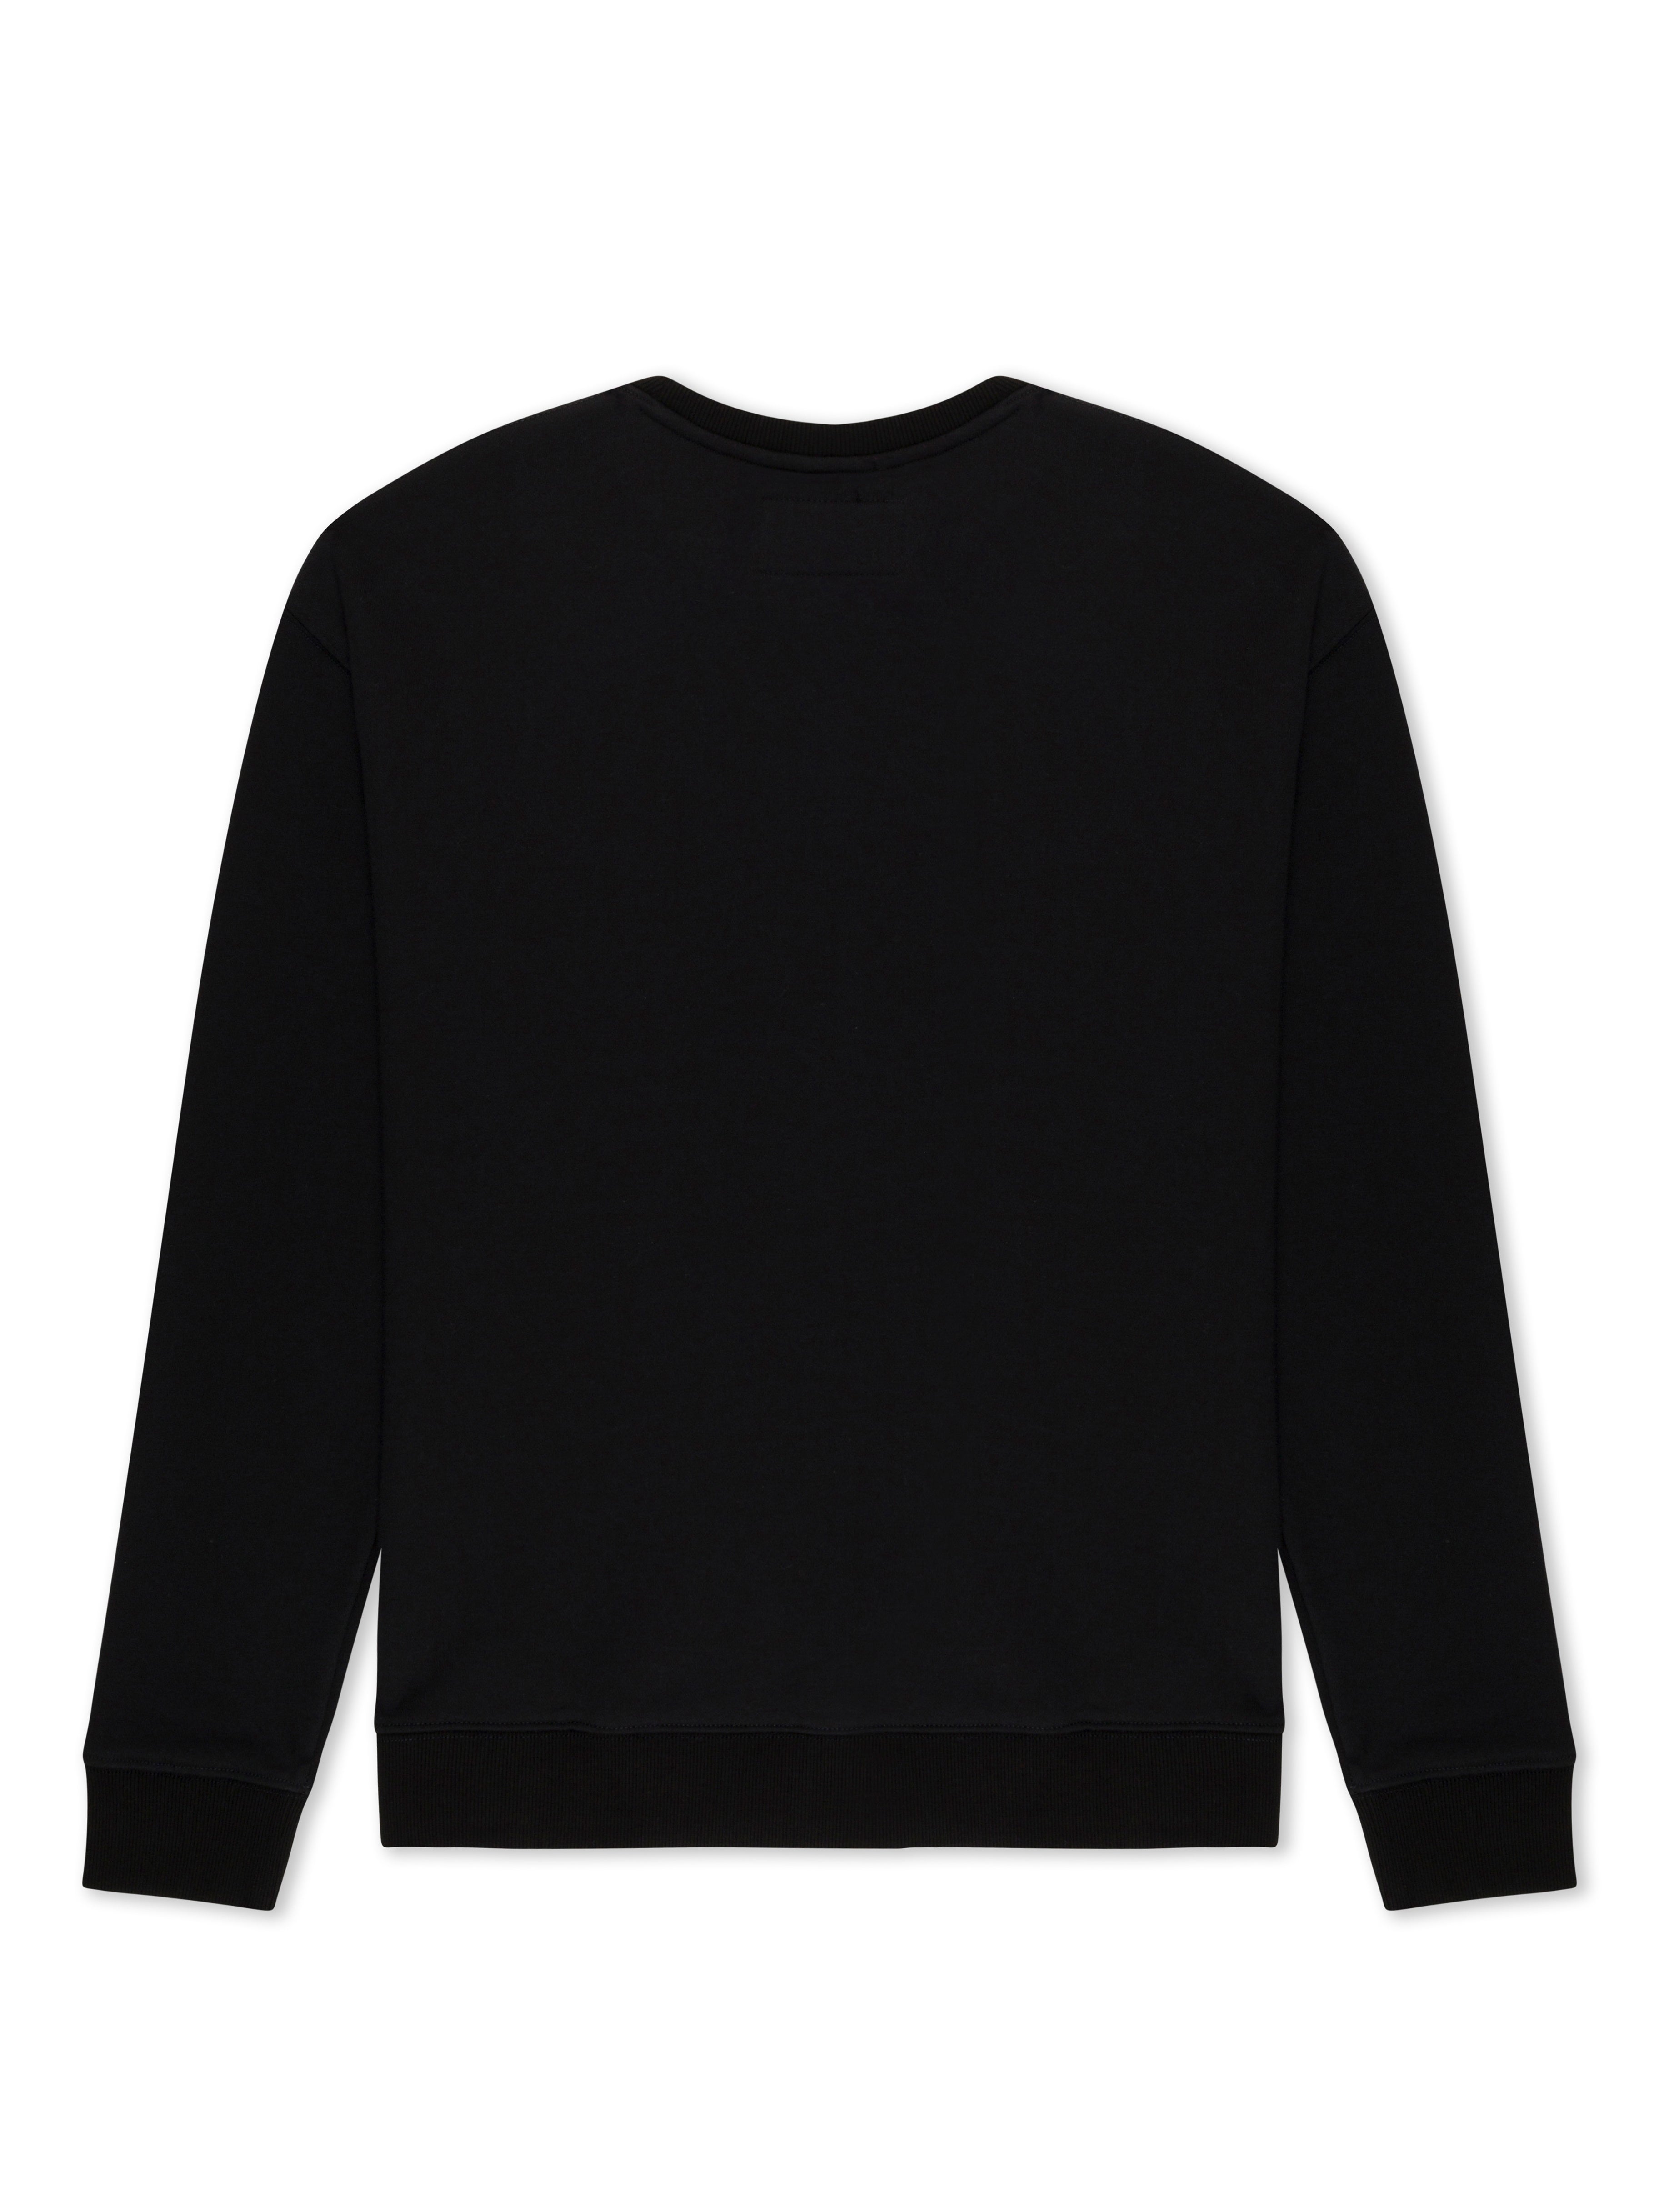 Sol Gym Cotton Long Sleeve Sweater, Black